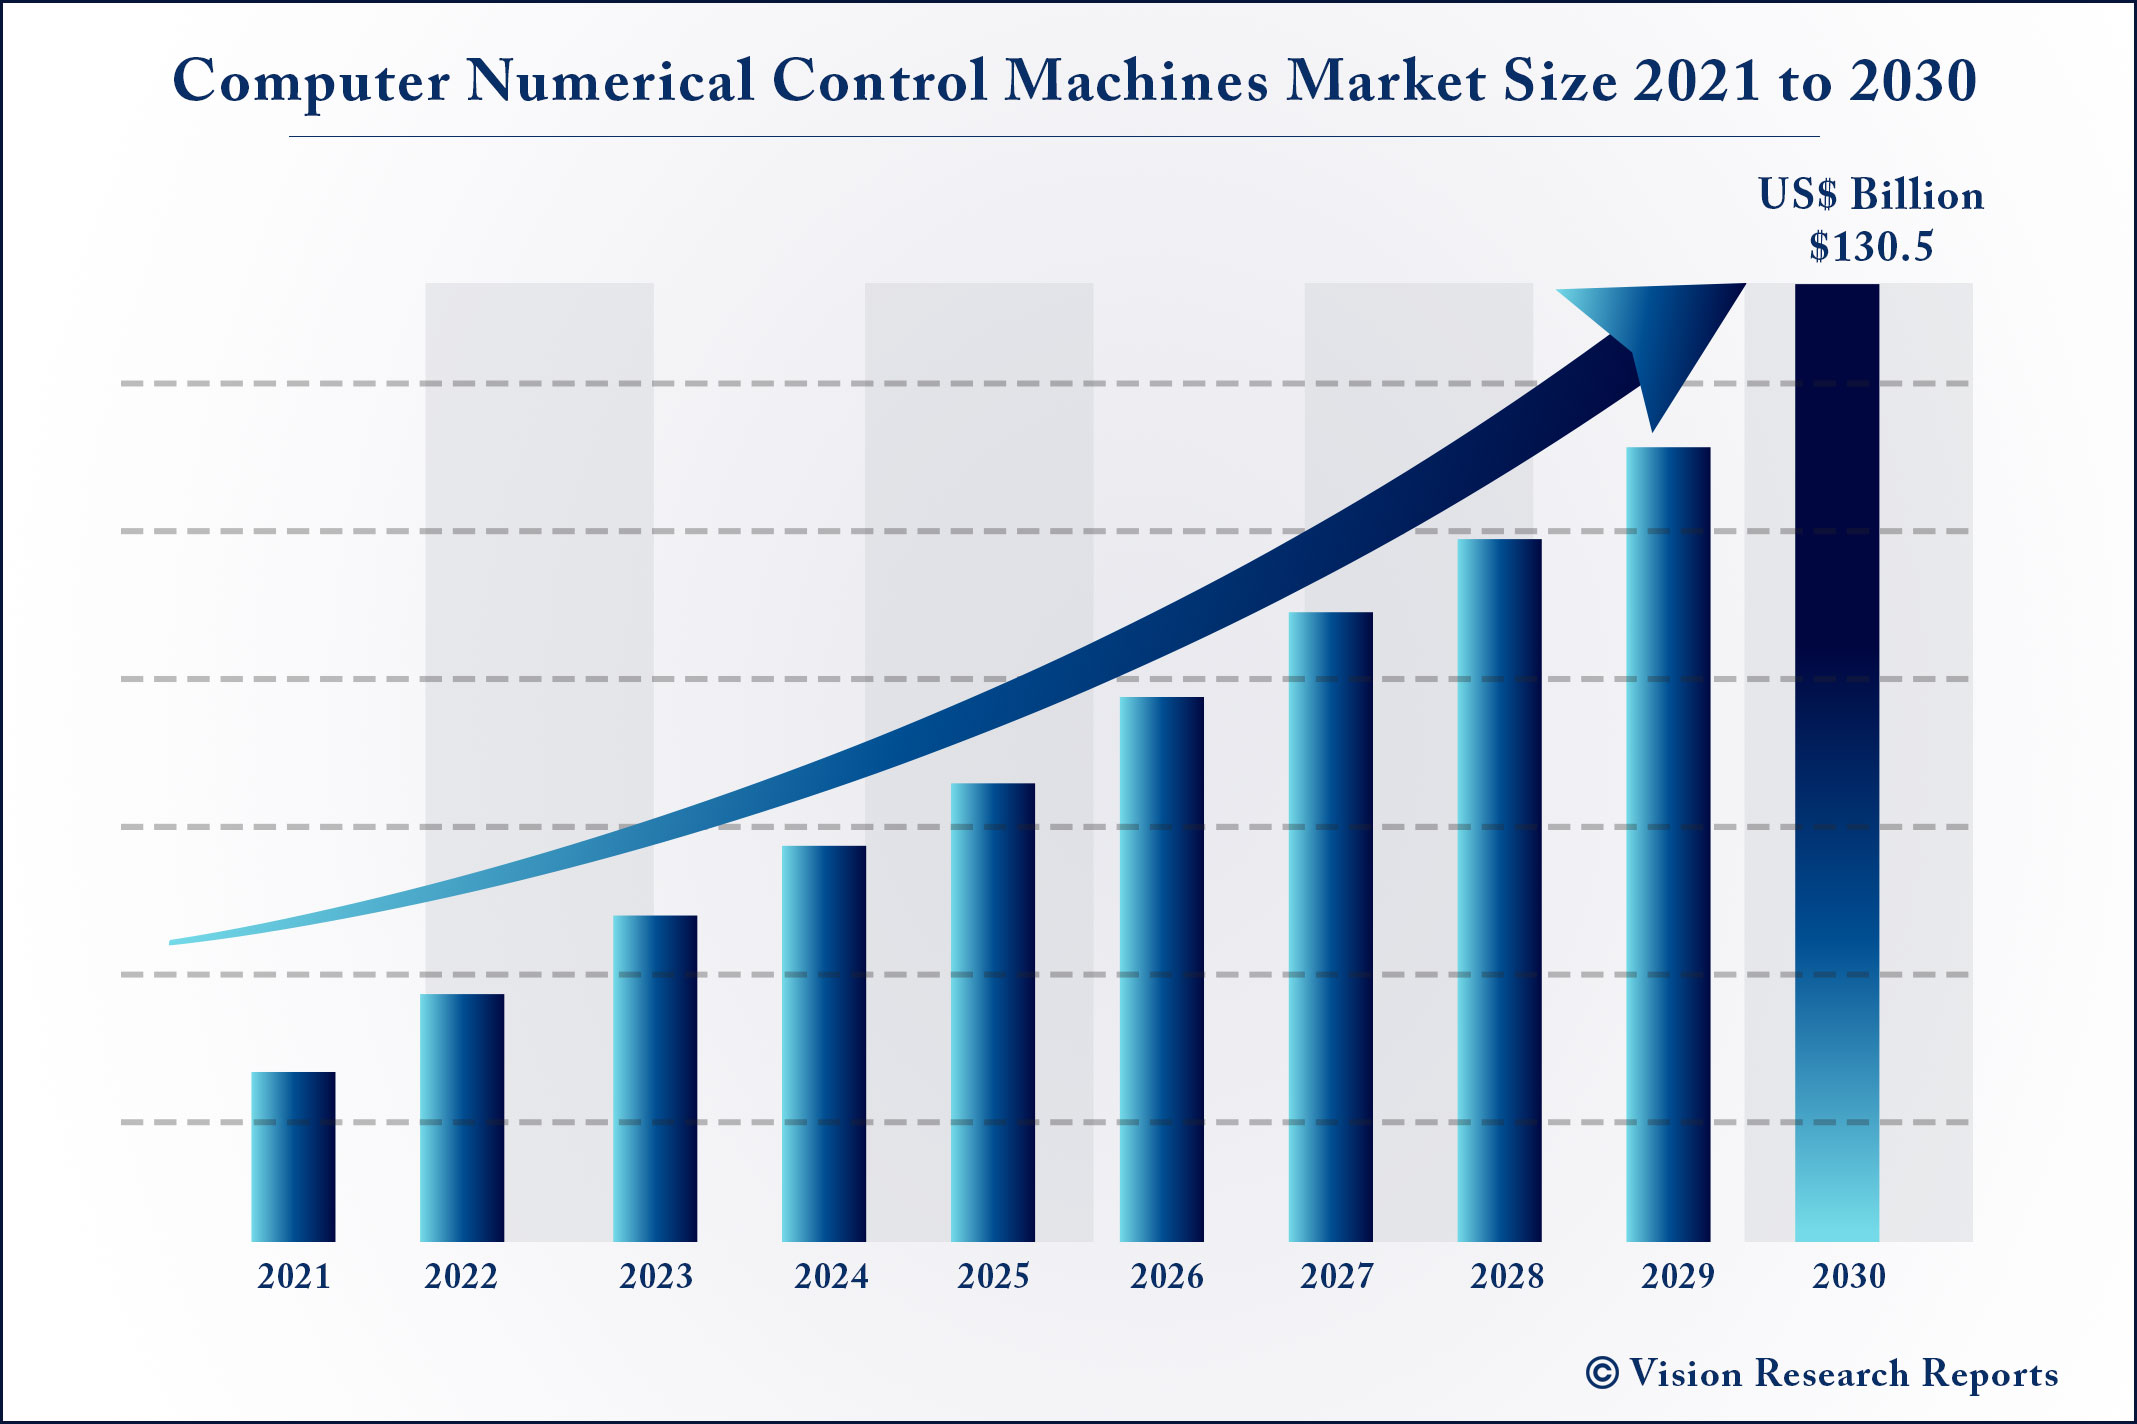 Computer Numerical Control Machines Market Size 2021 to 2030